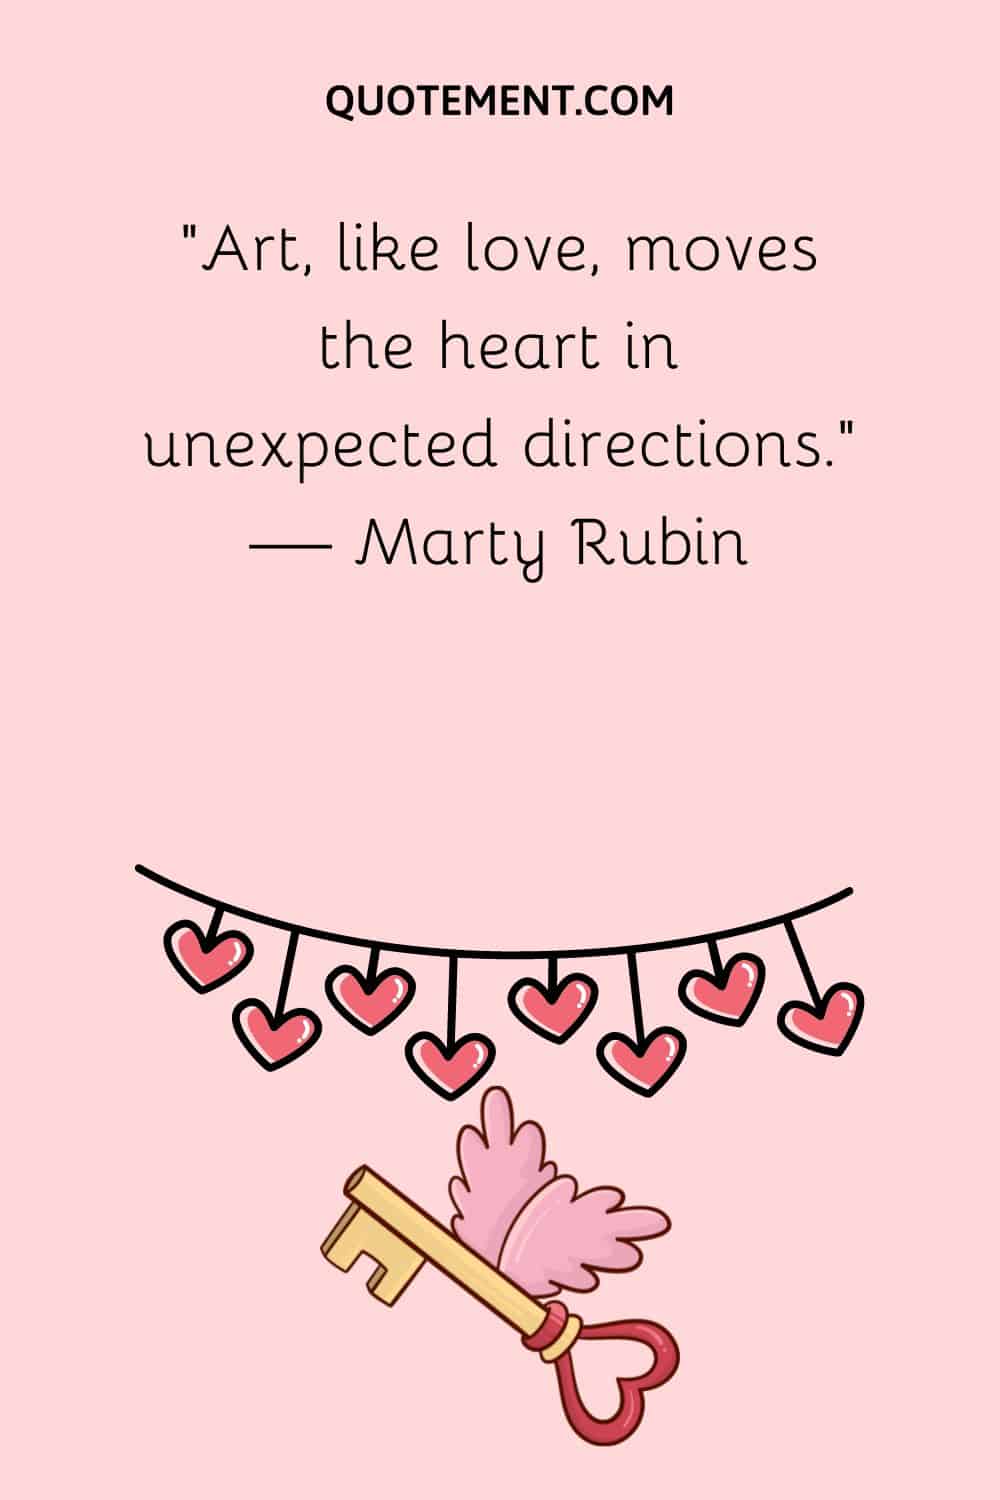 “Art, like love, moves the heart in unexpected directions.“ — Marty Rubin